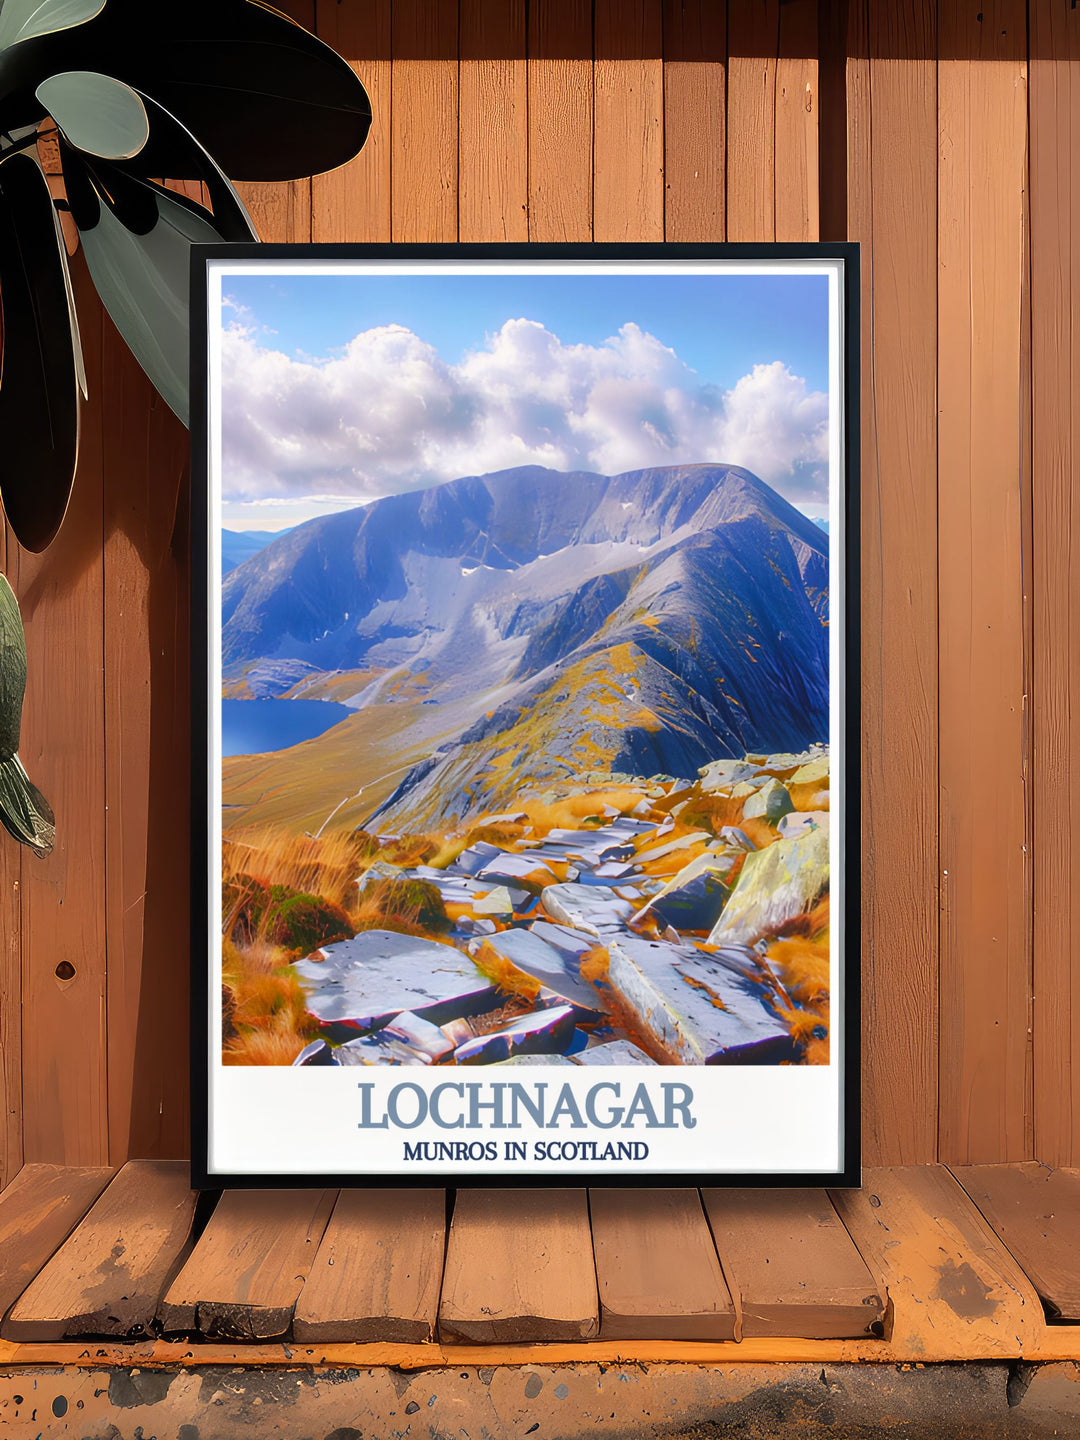 Lochnagar Summit Prints highlighting the enchanting scenery of the Scottish Highlands with captivating vintage posters of Lochnagar Munro and Beinn Chìochan Munro perfect for home decor and nature inspired art collections